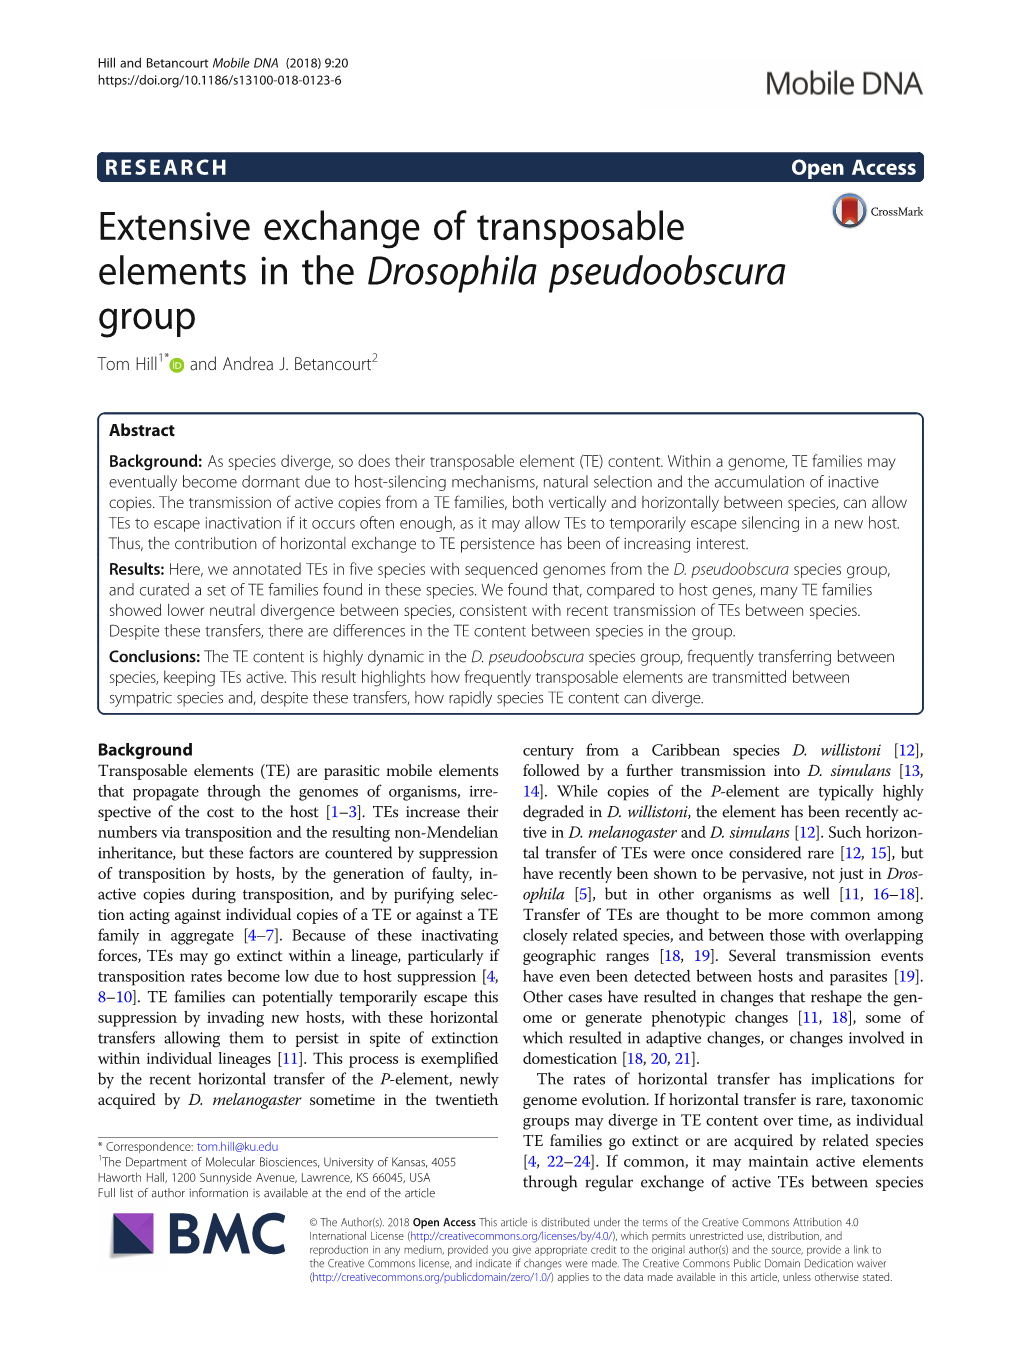 Extensive Exchange of Transposable Elements in the Drosophila Pseudoobscura Group Tom Hill1* and Andrea J